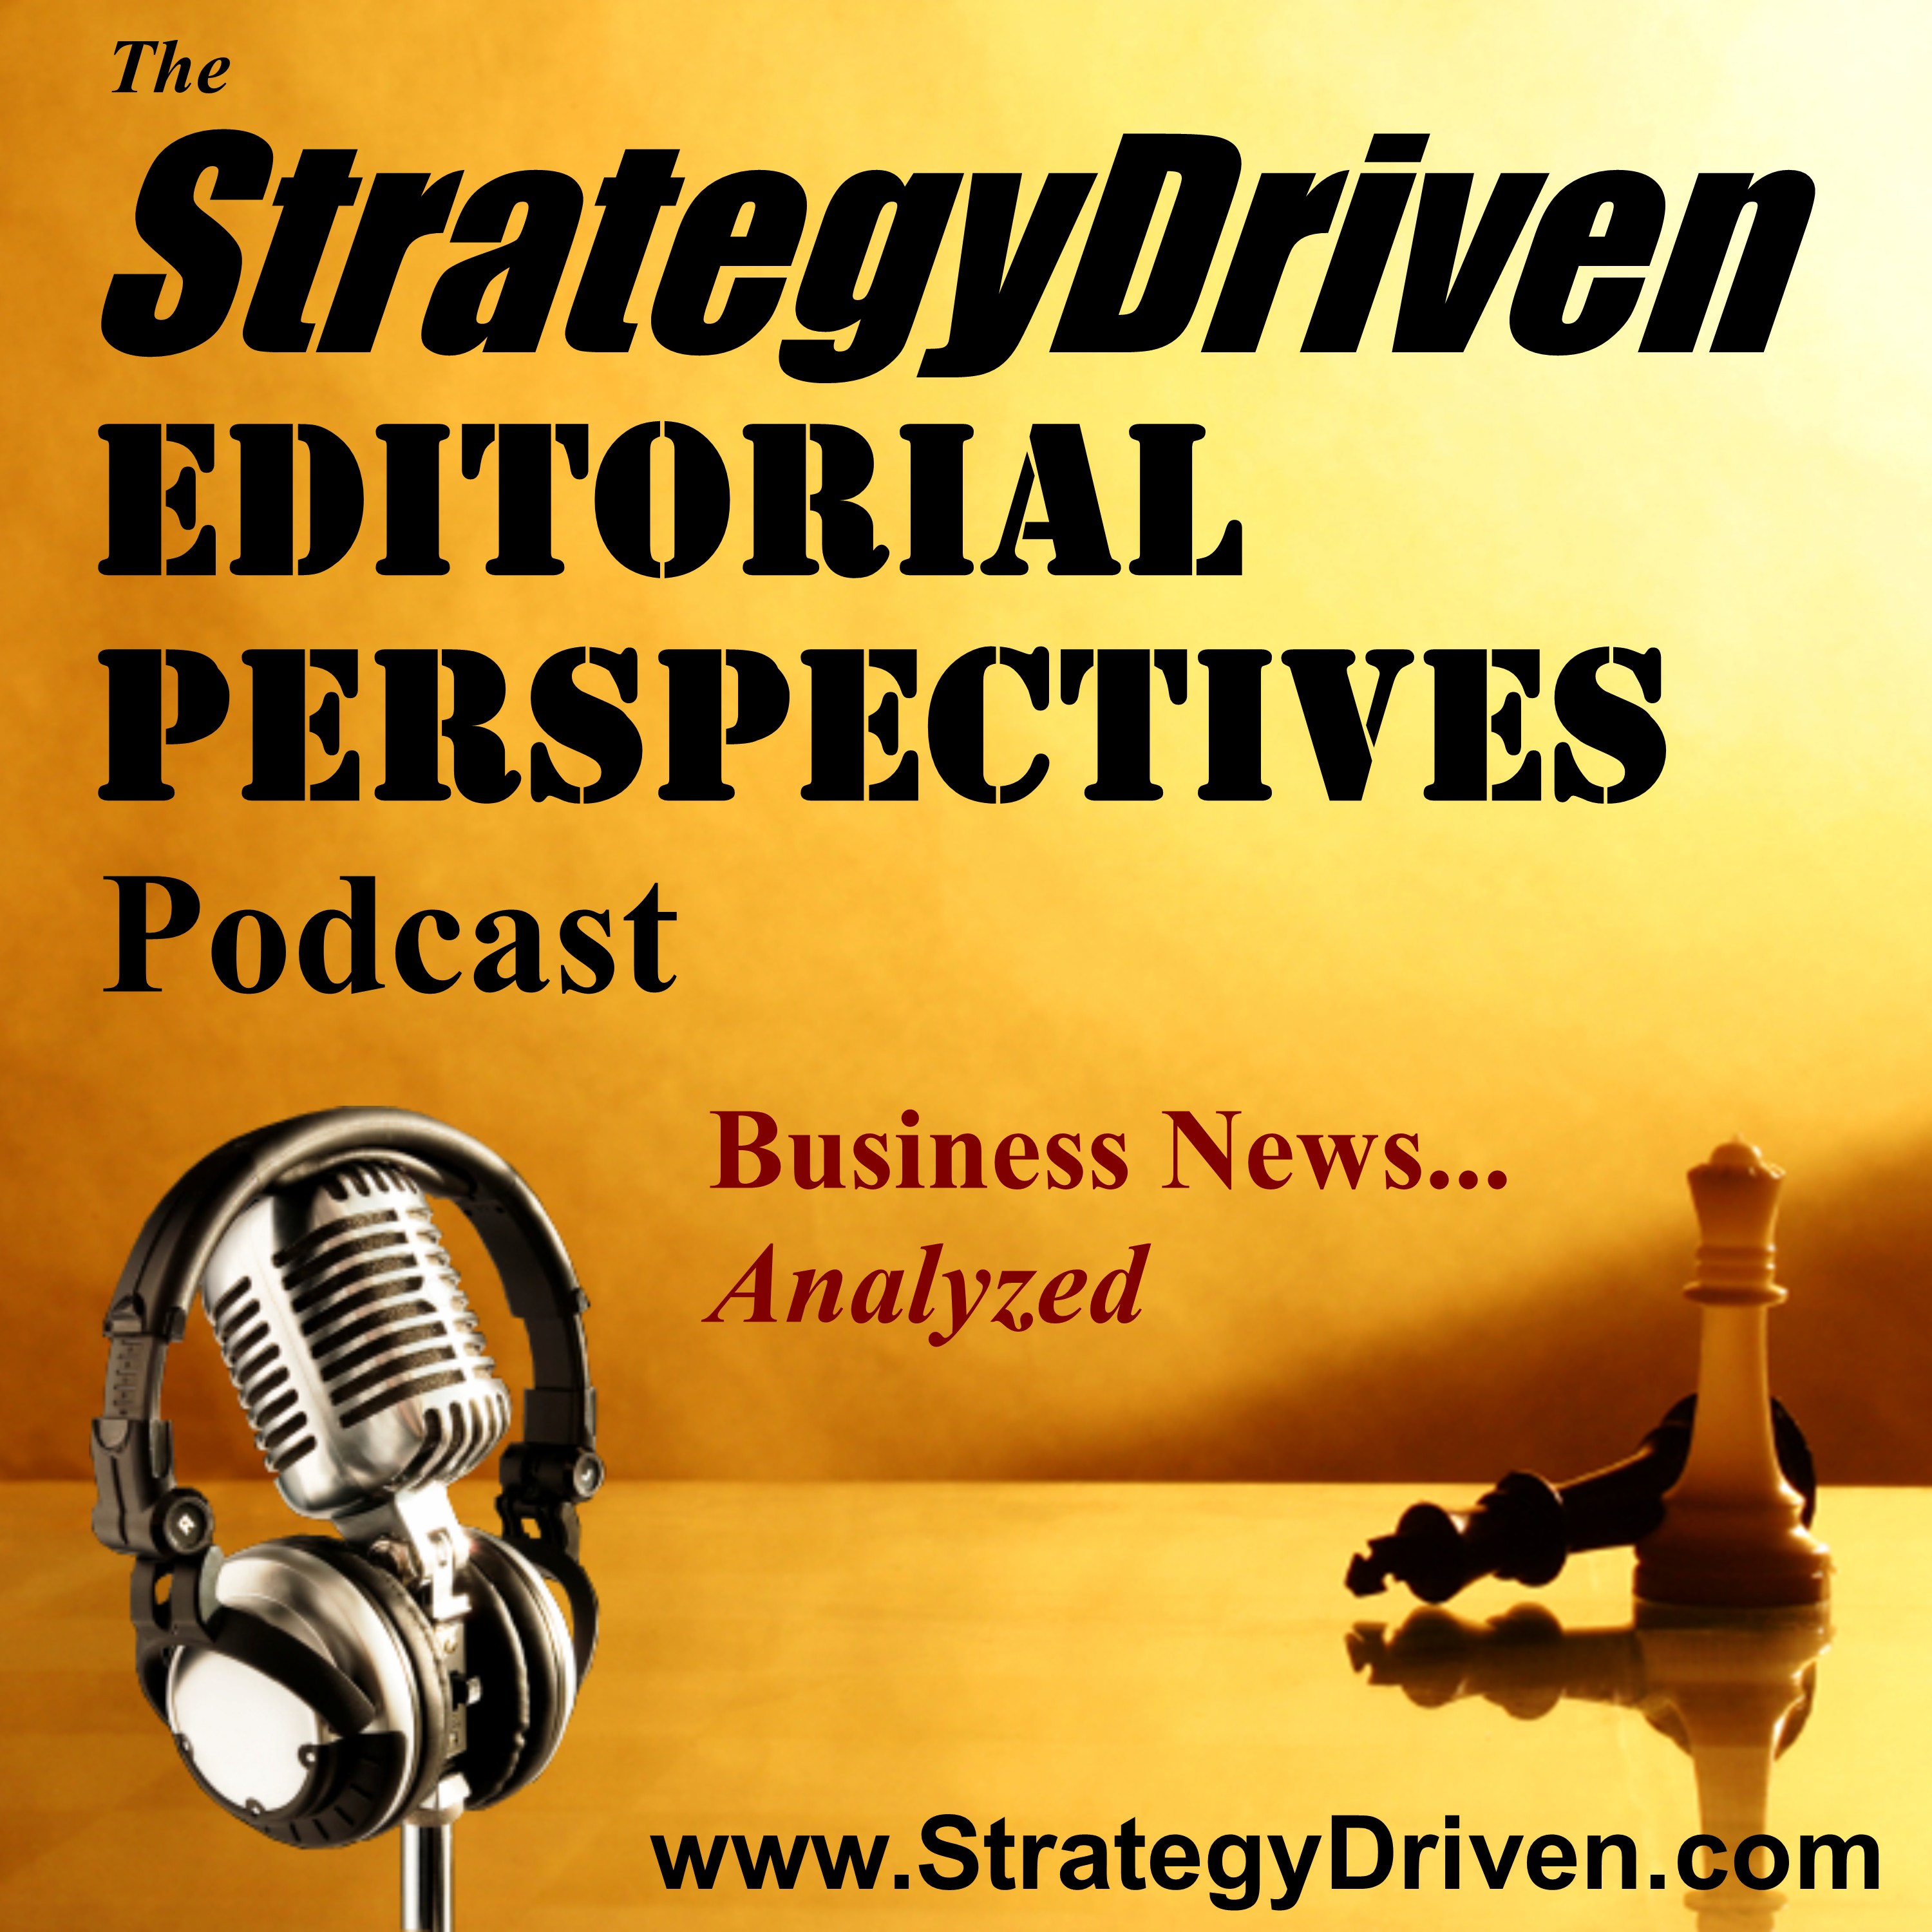 StrategyDriven Editorial Perspective